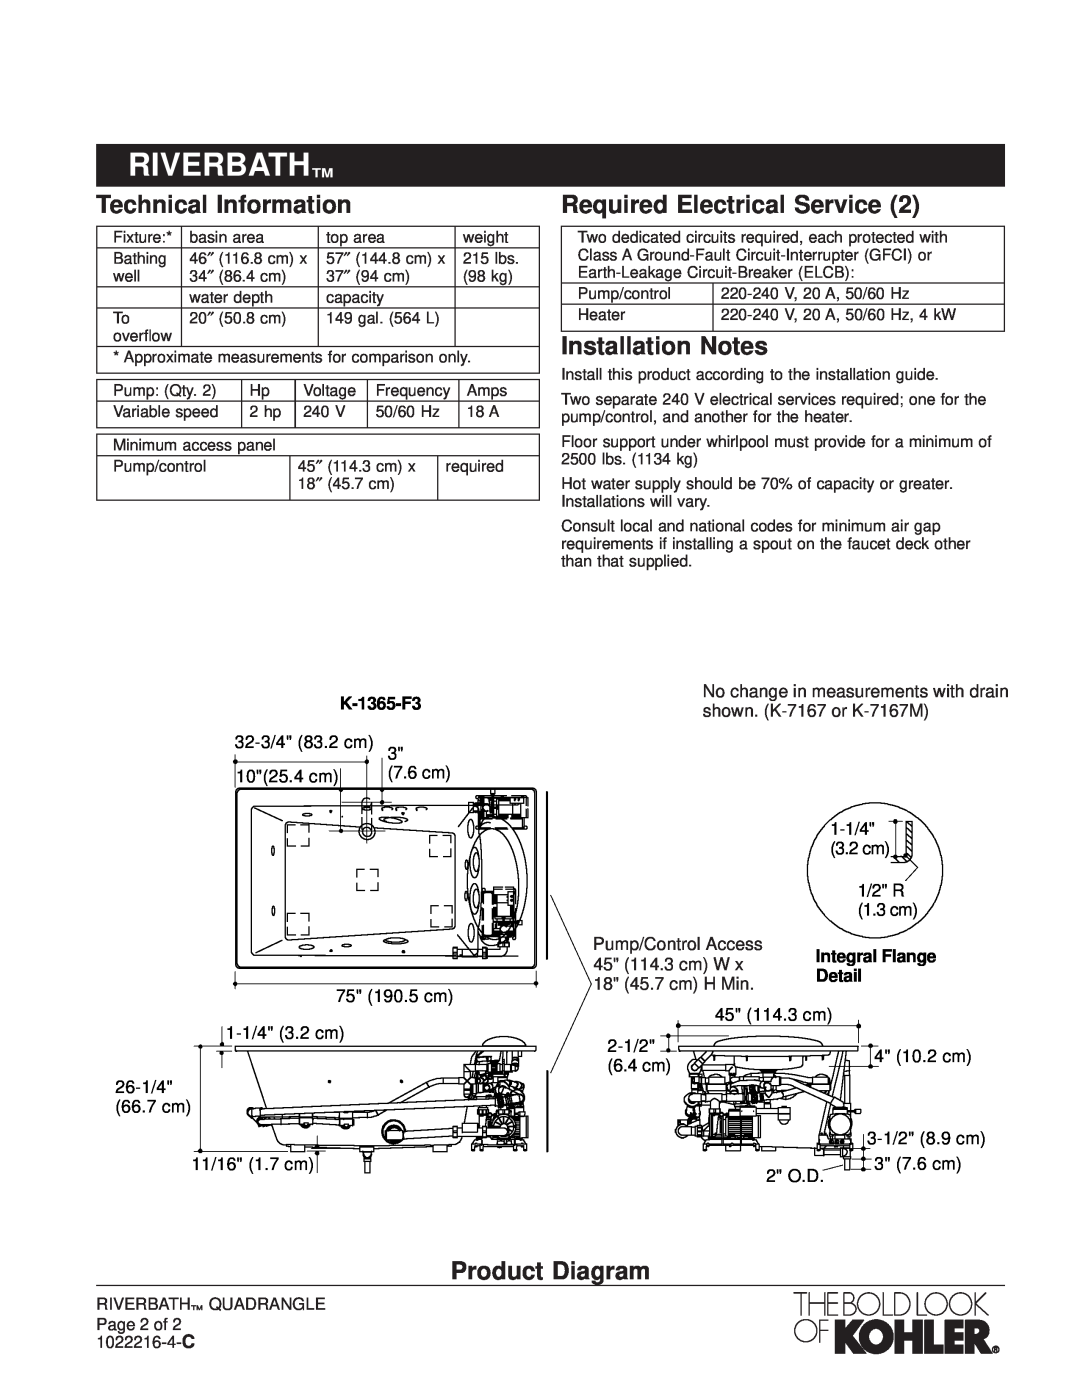 Kohler K-1365-F3 manual Technical Information, Required Electrical Service, Installation Notes, Product Diagram, Riverbath 